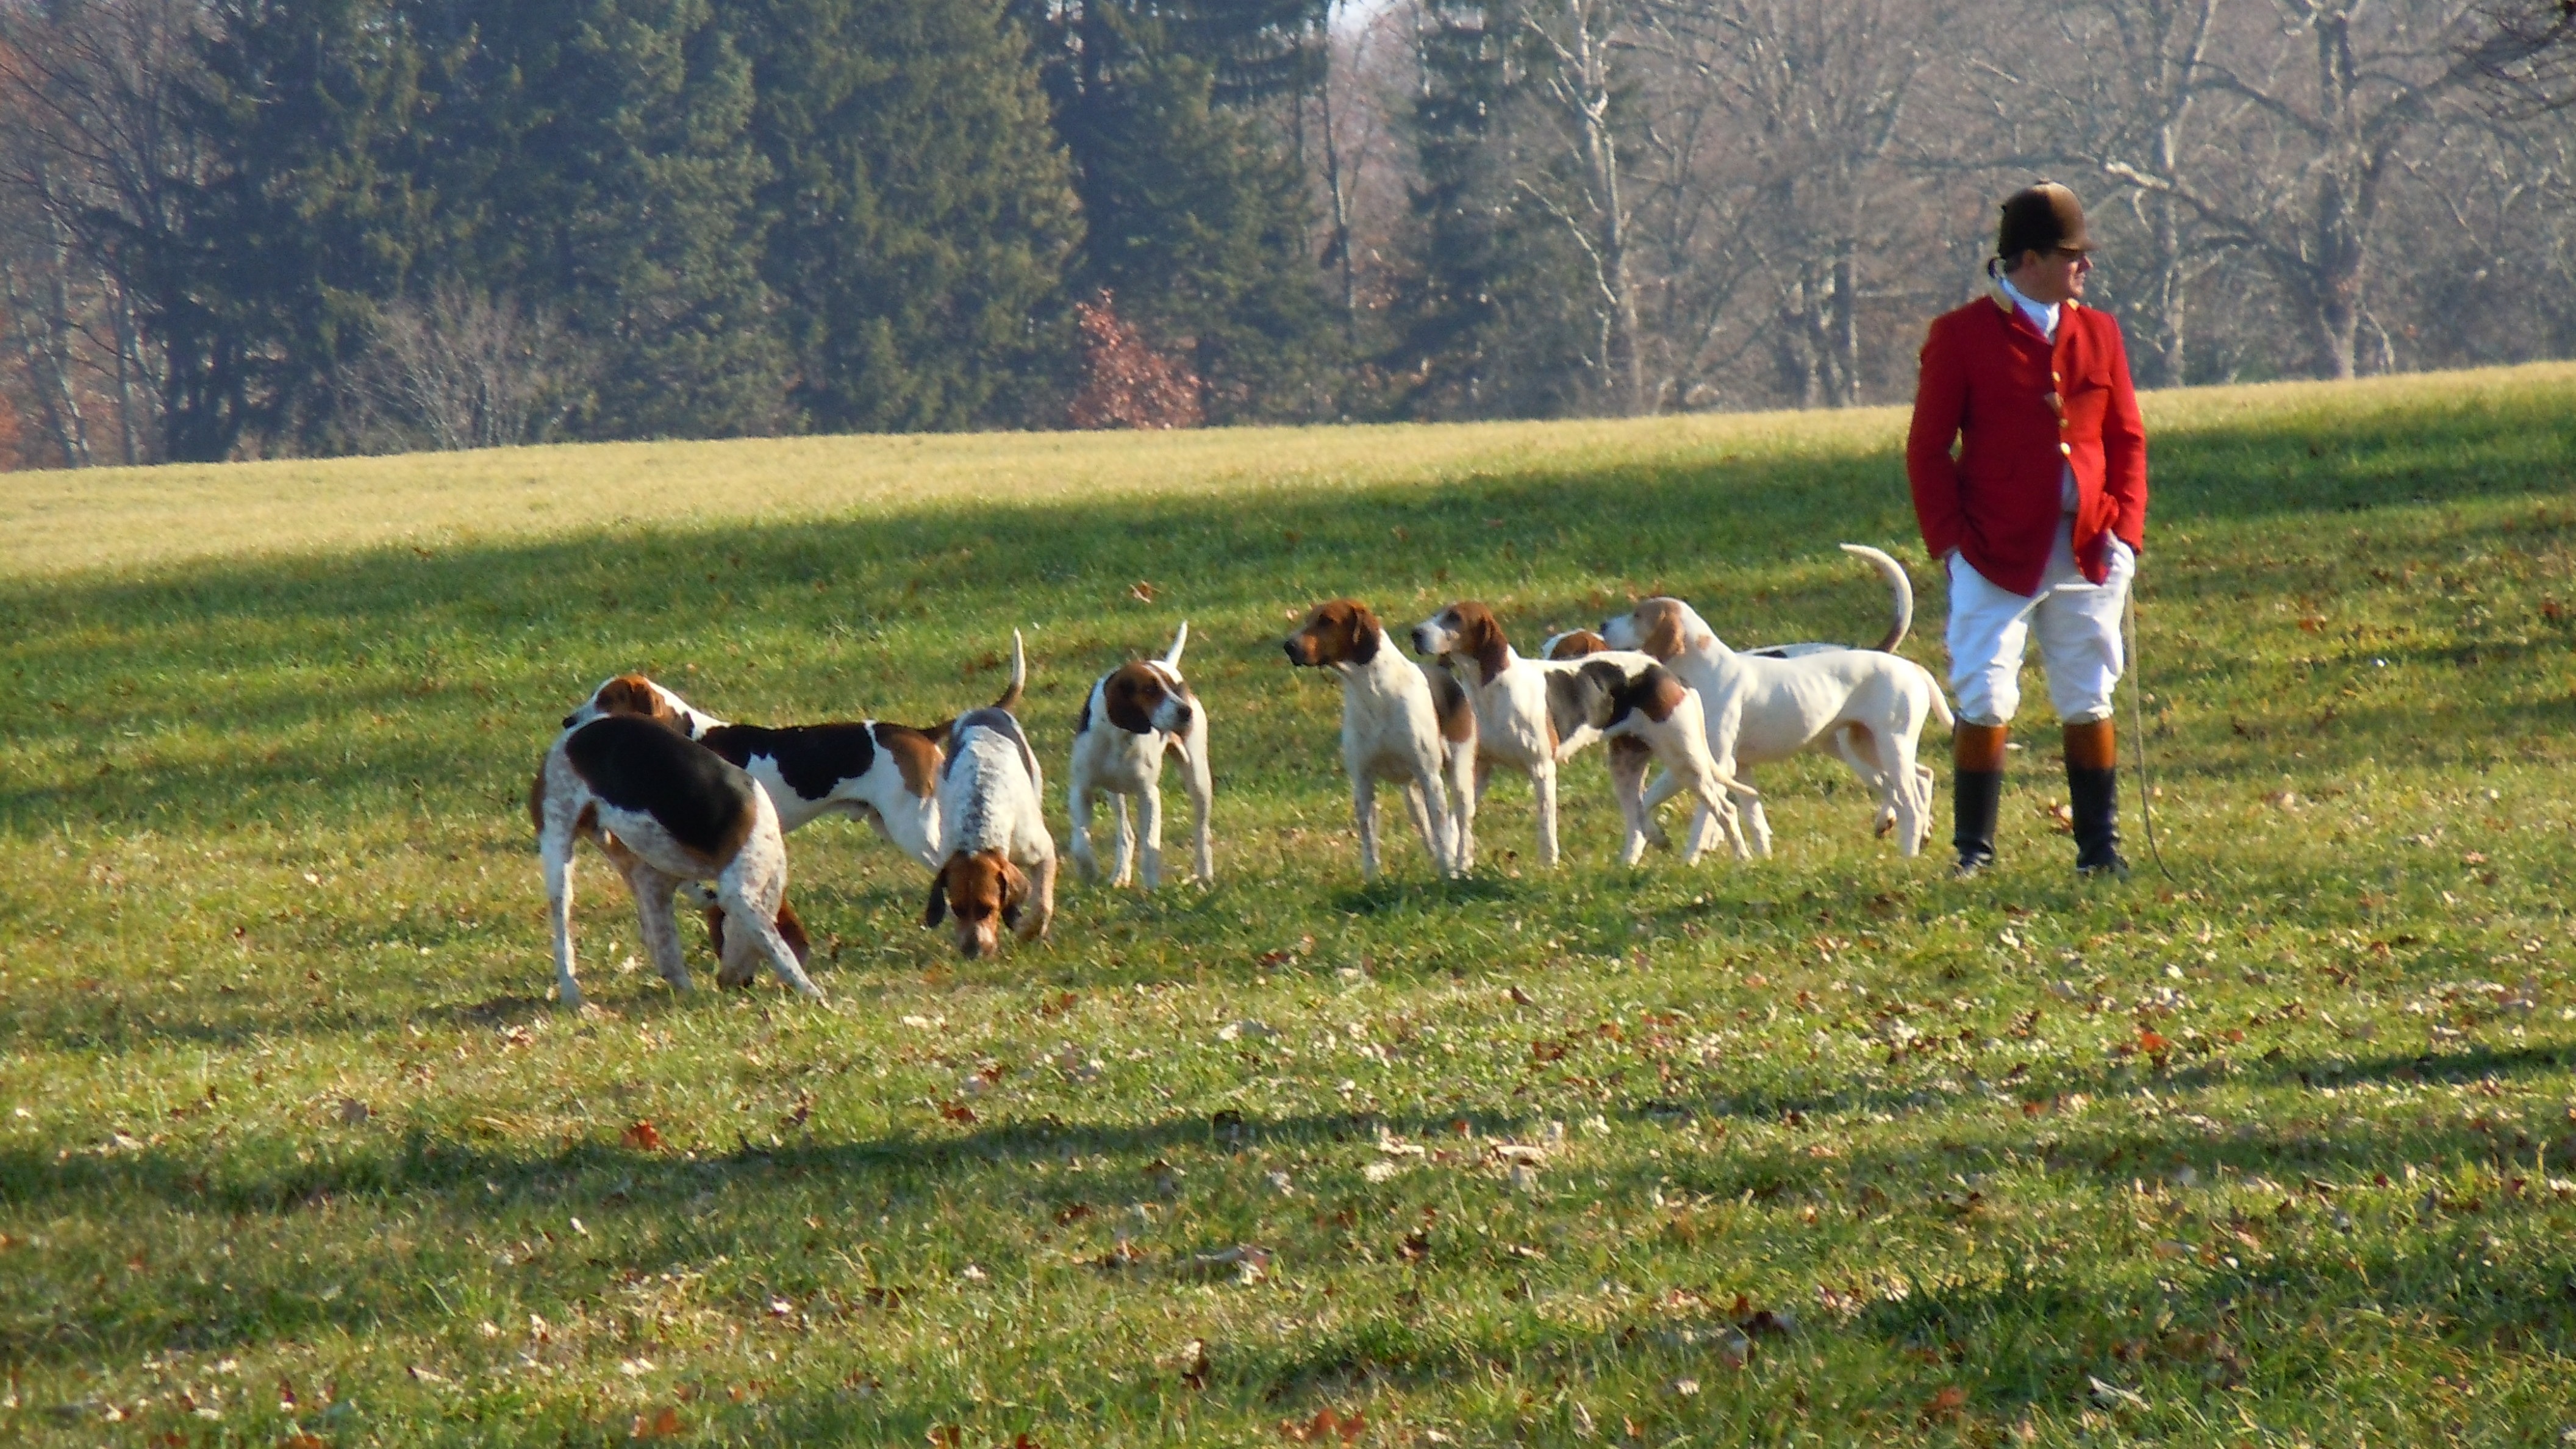 1920x1200 wallpaper | Red Jacket, Pet, Hunt, English, Dogs, domestic